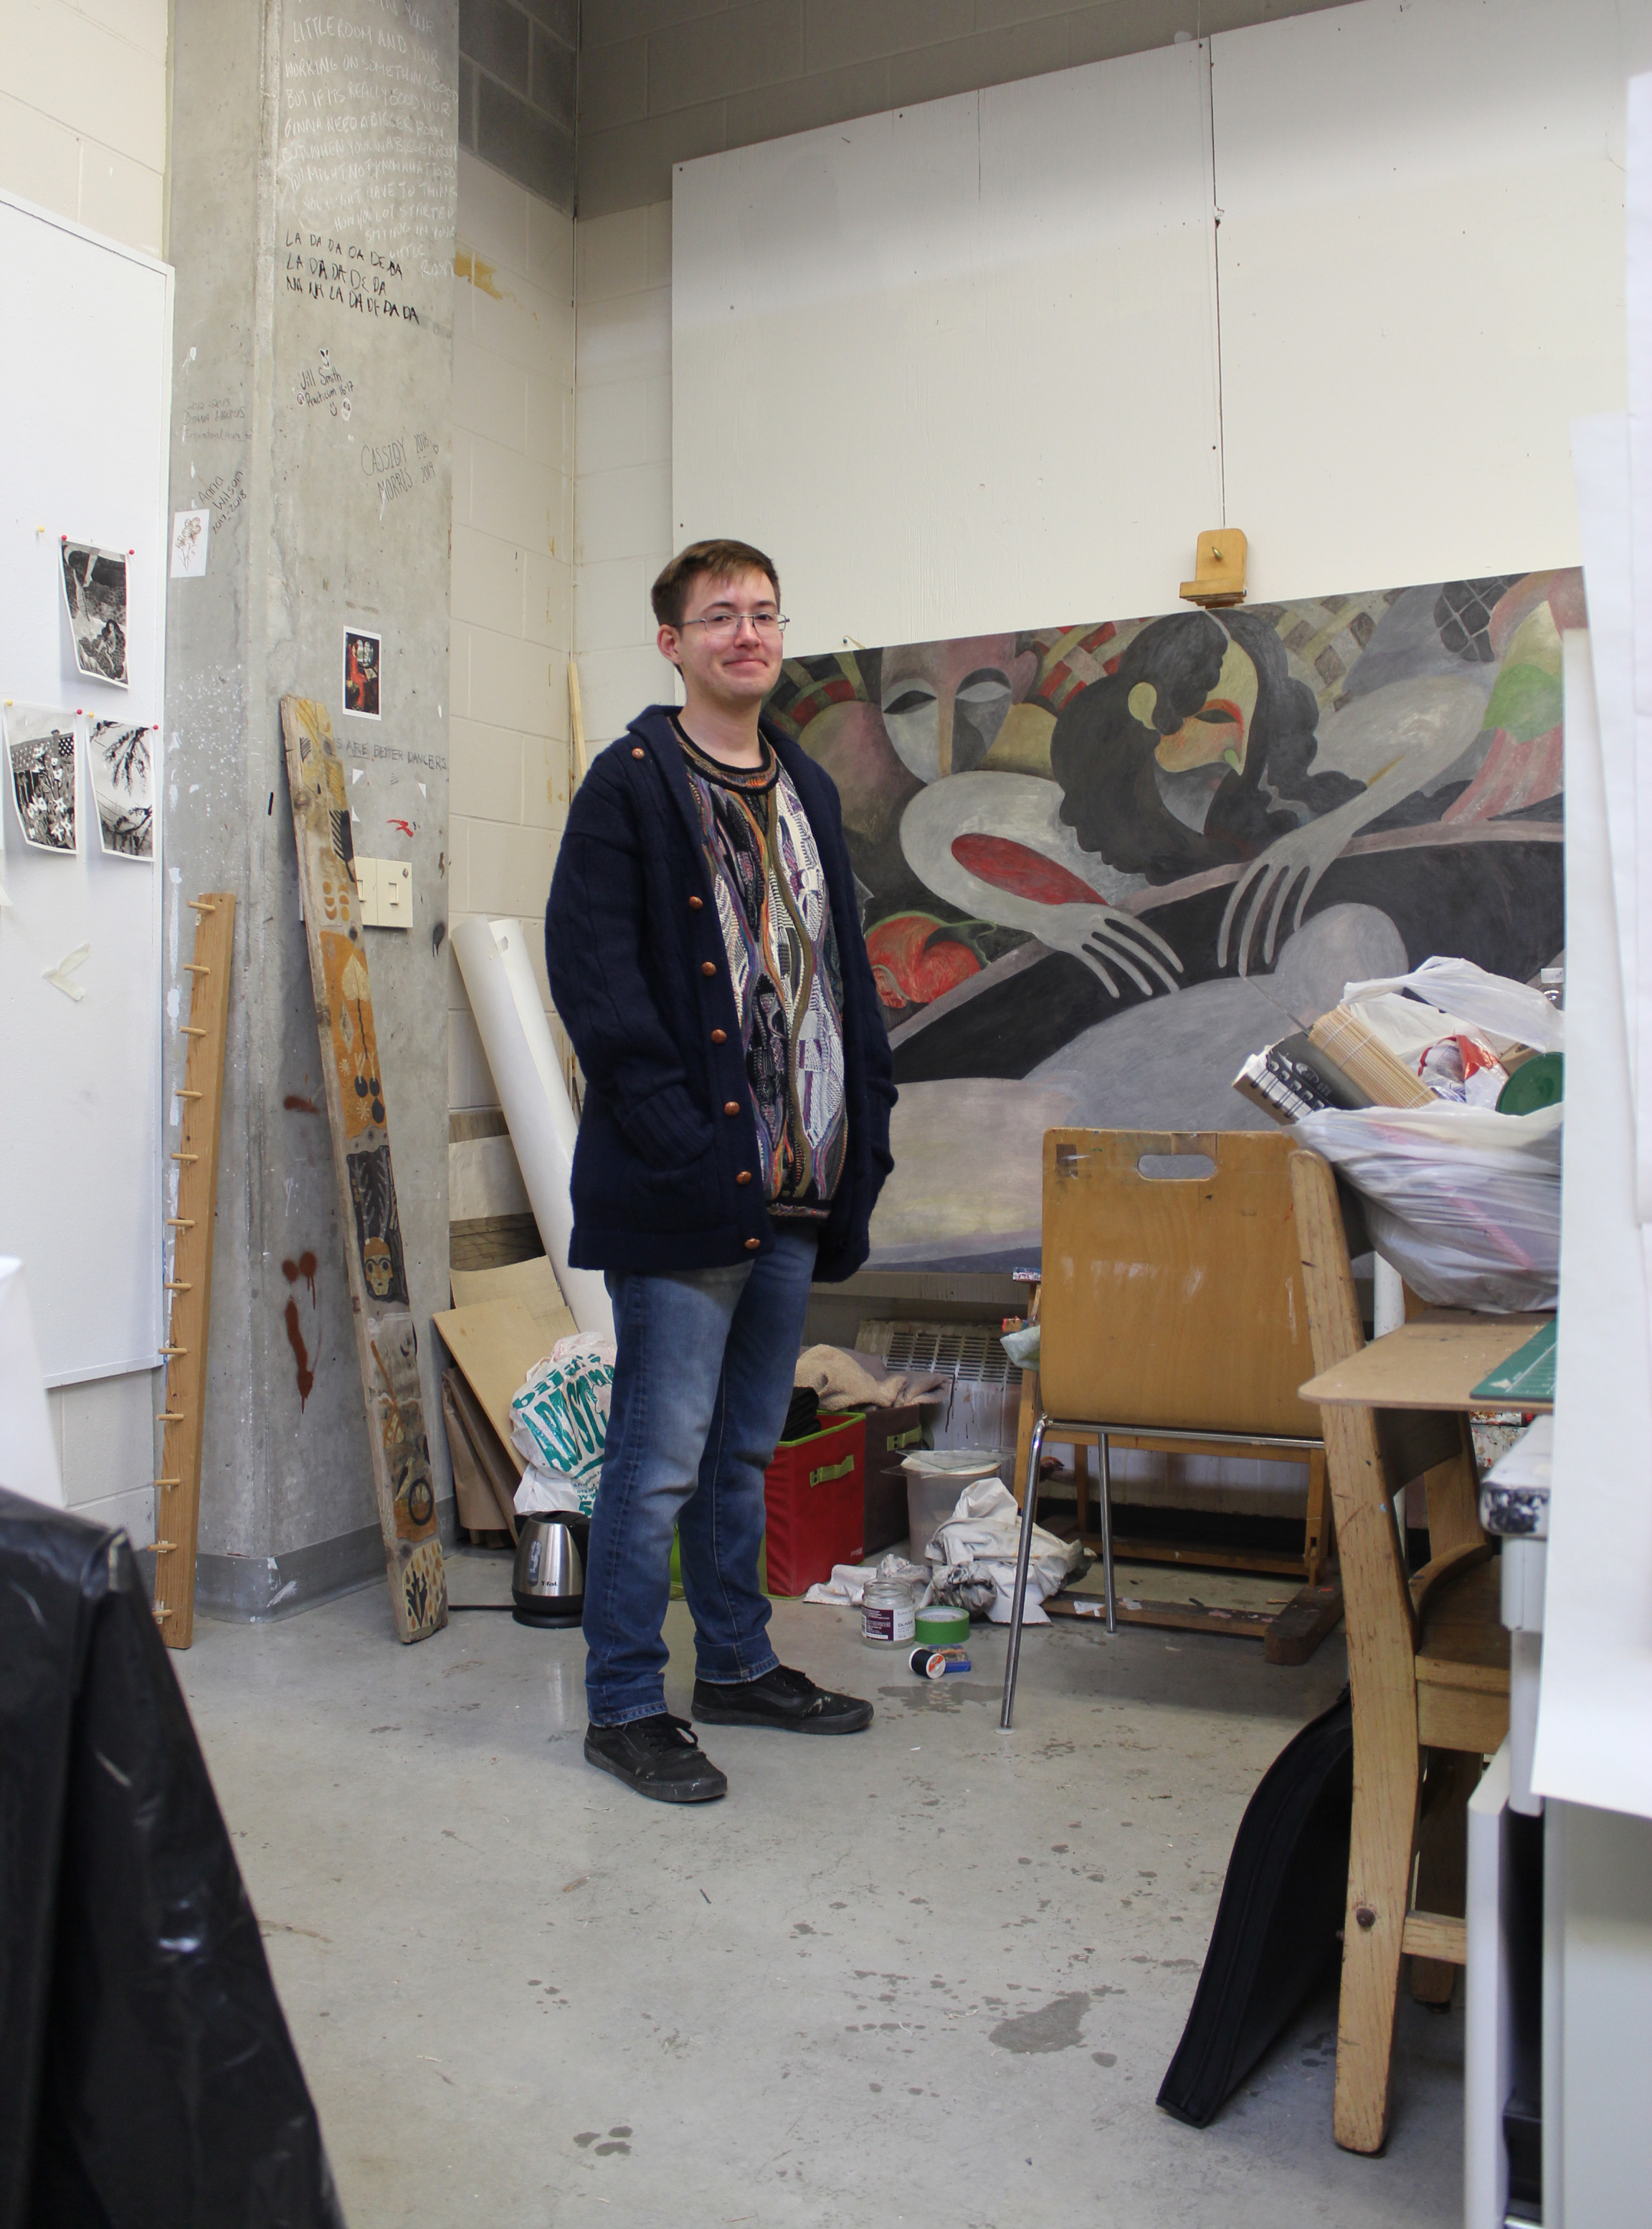 Reilly standing in their studio surrounded by artwork.